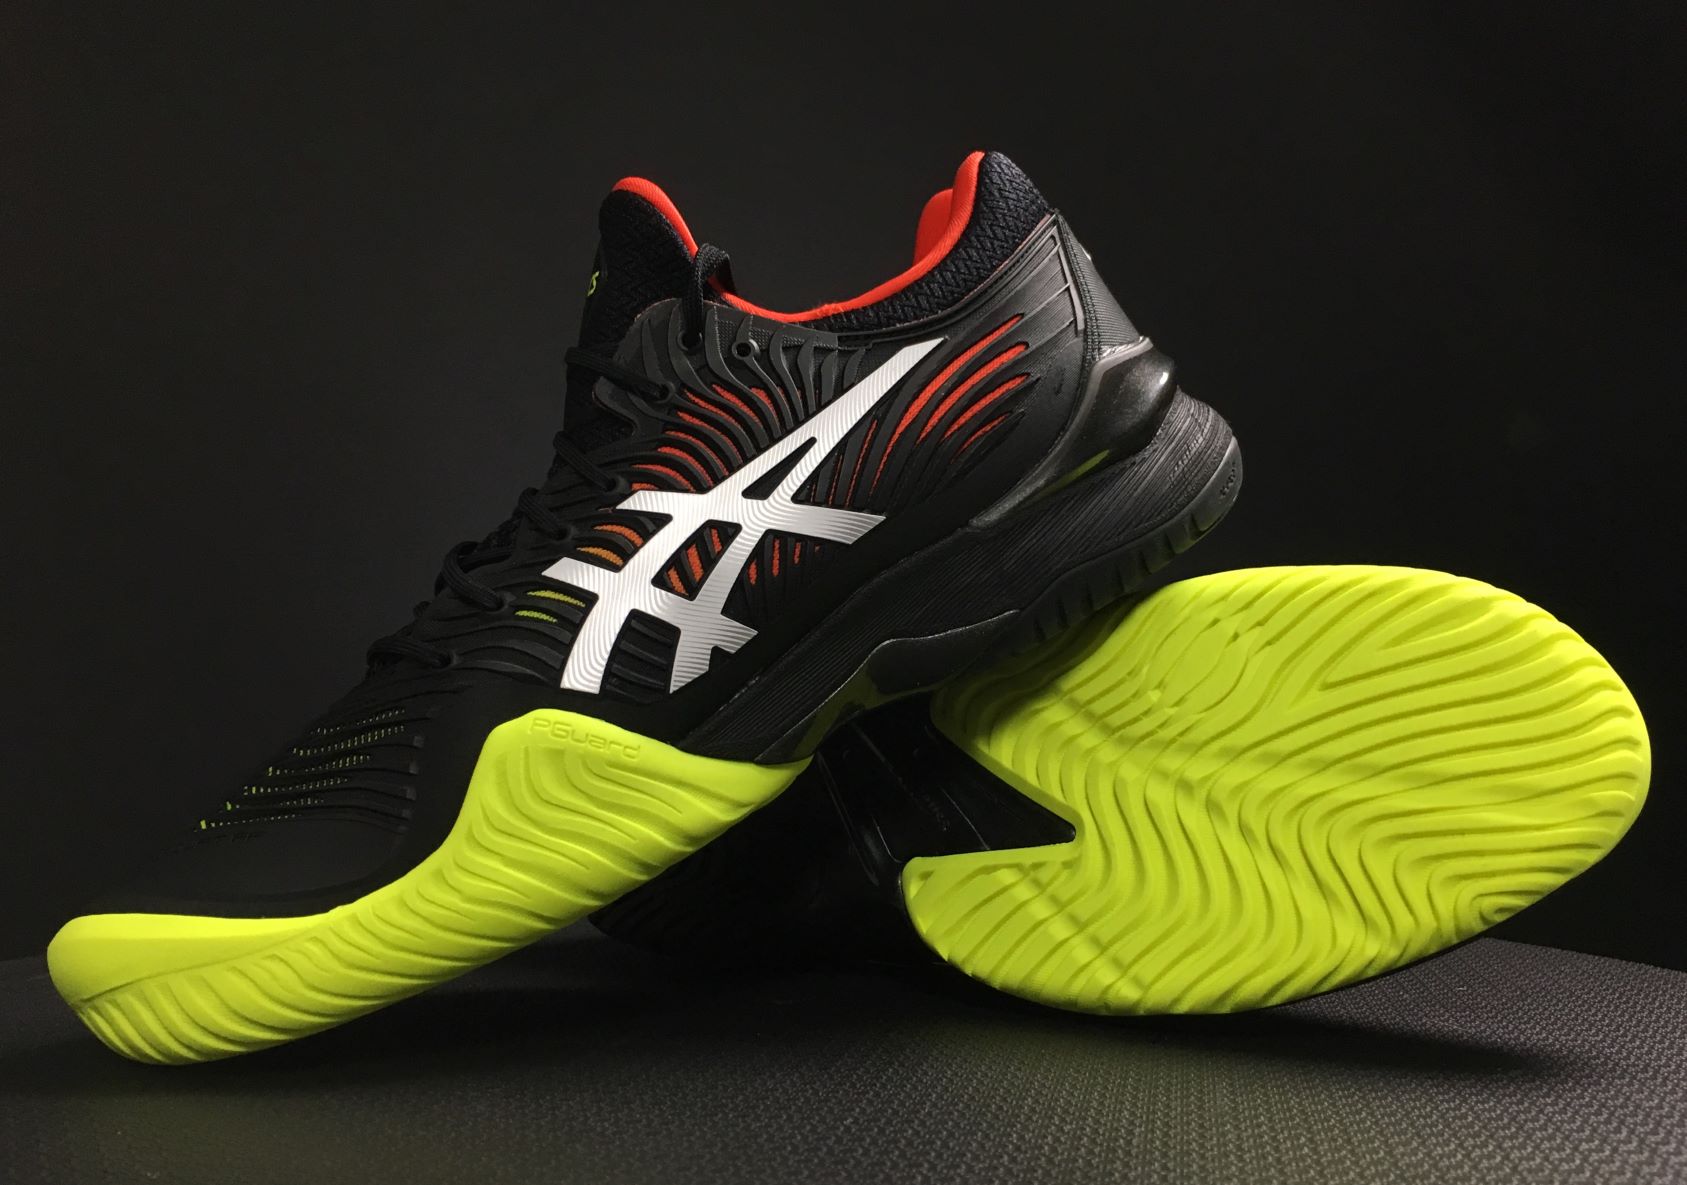 ASICS COURT FF 2 Review: What ya Gonna Do When They Come For You?